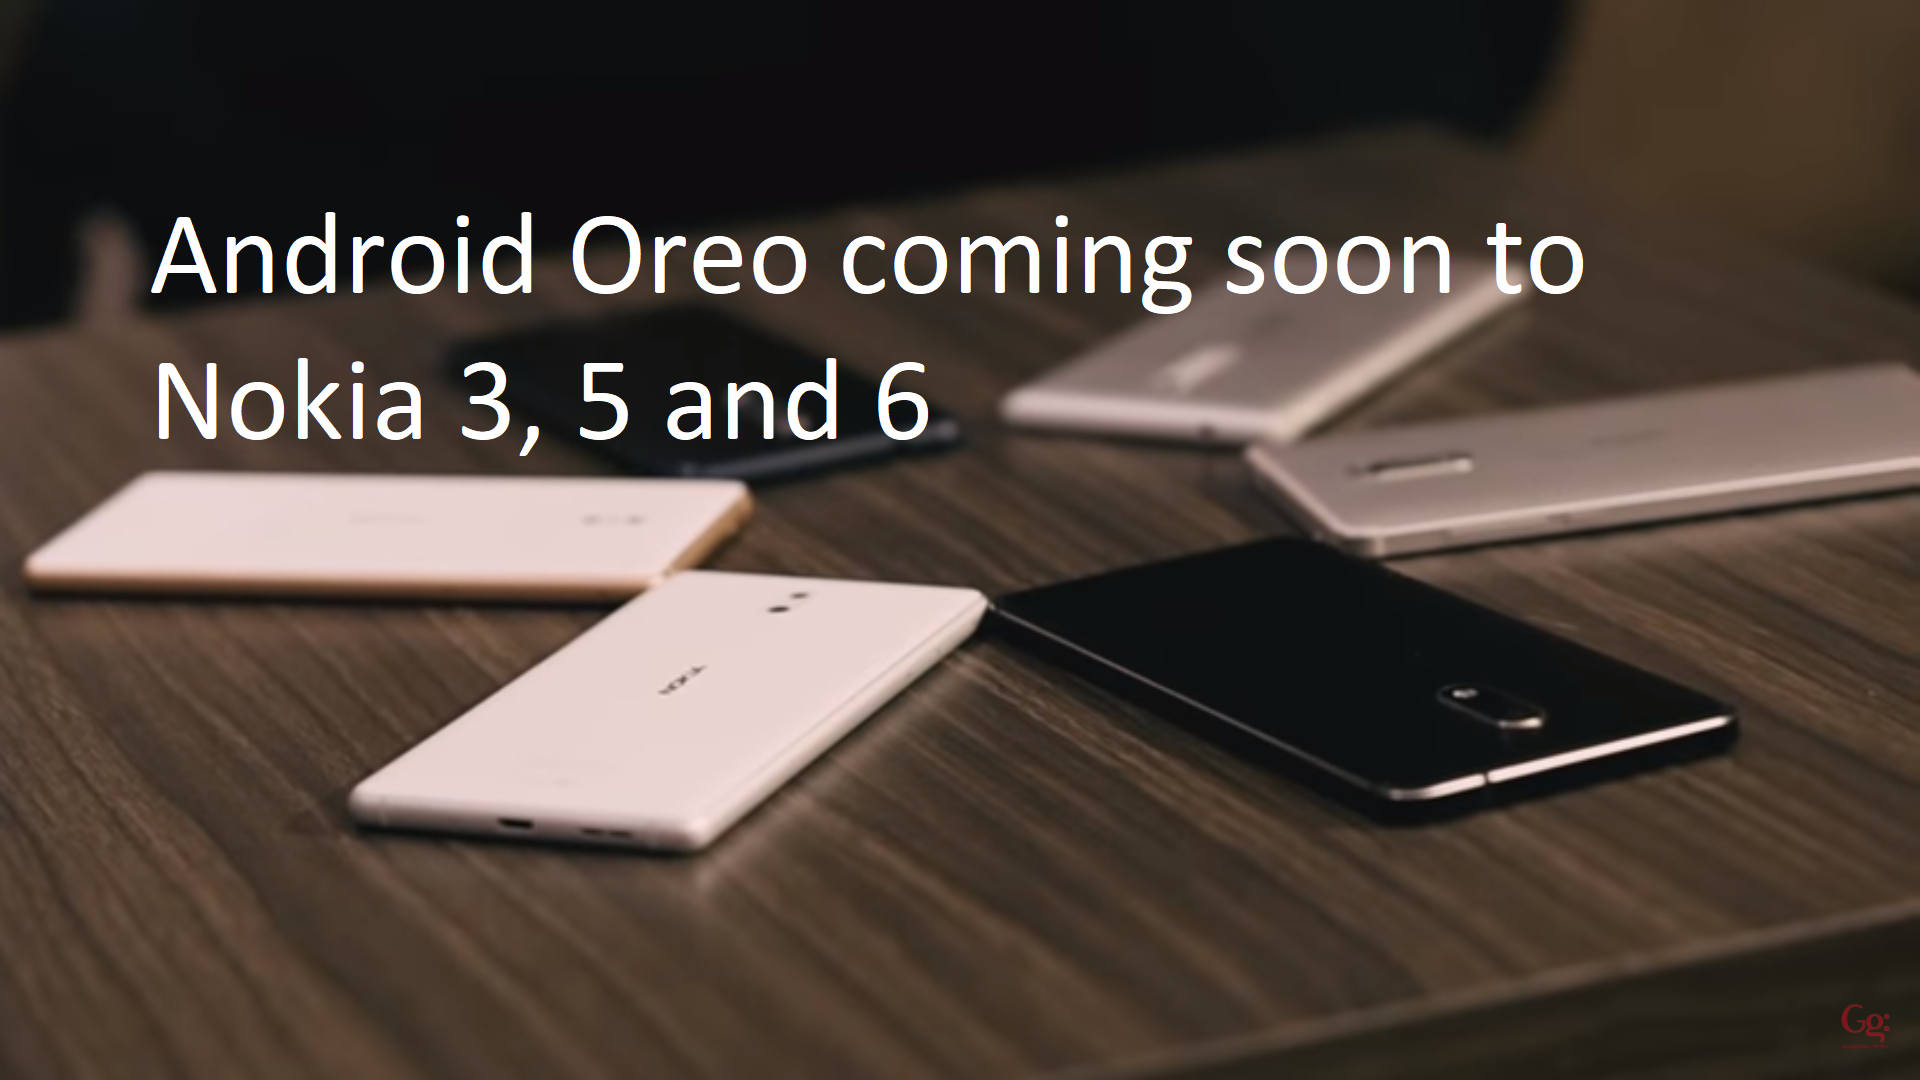 Nokia 3, 5 and 6 to receive Android 8.0 Oreo update